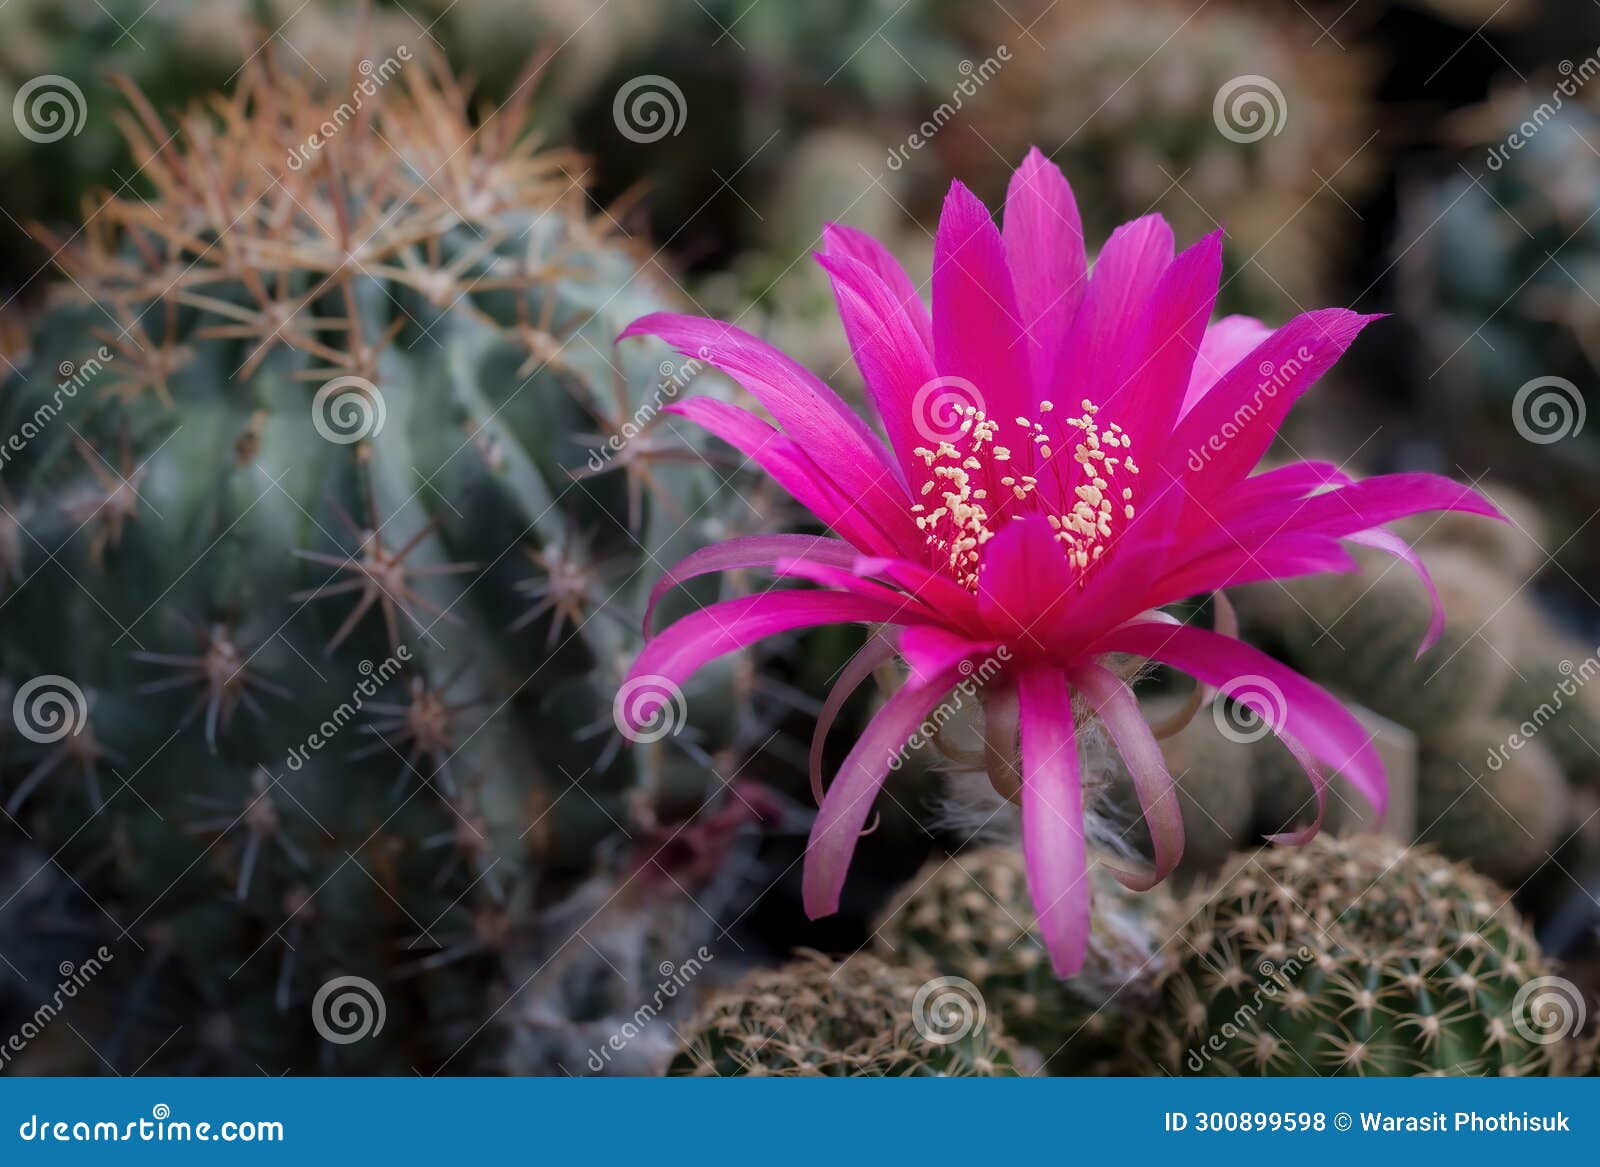 https://thumbs.dreamstime.com/z/mammillaria-benneckei-type-cactus-hook-spines-there-tuberous-propagation-clump-together-group-blooming-close-up-300899598.jpg